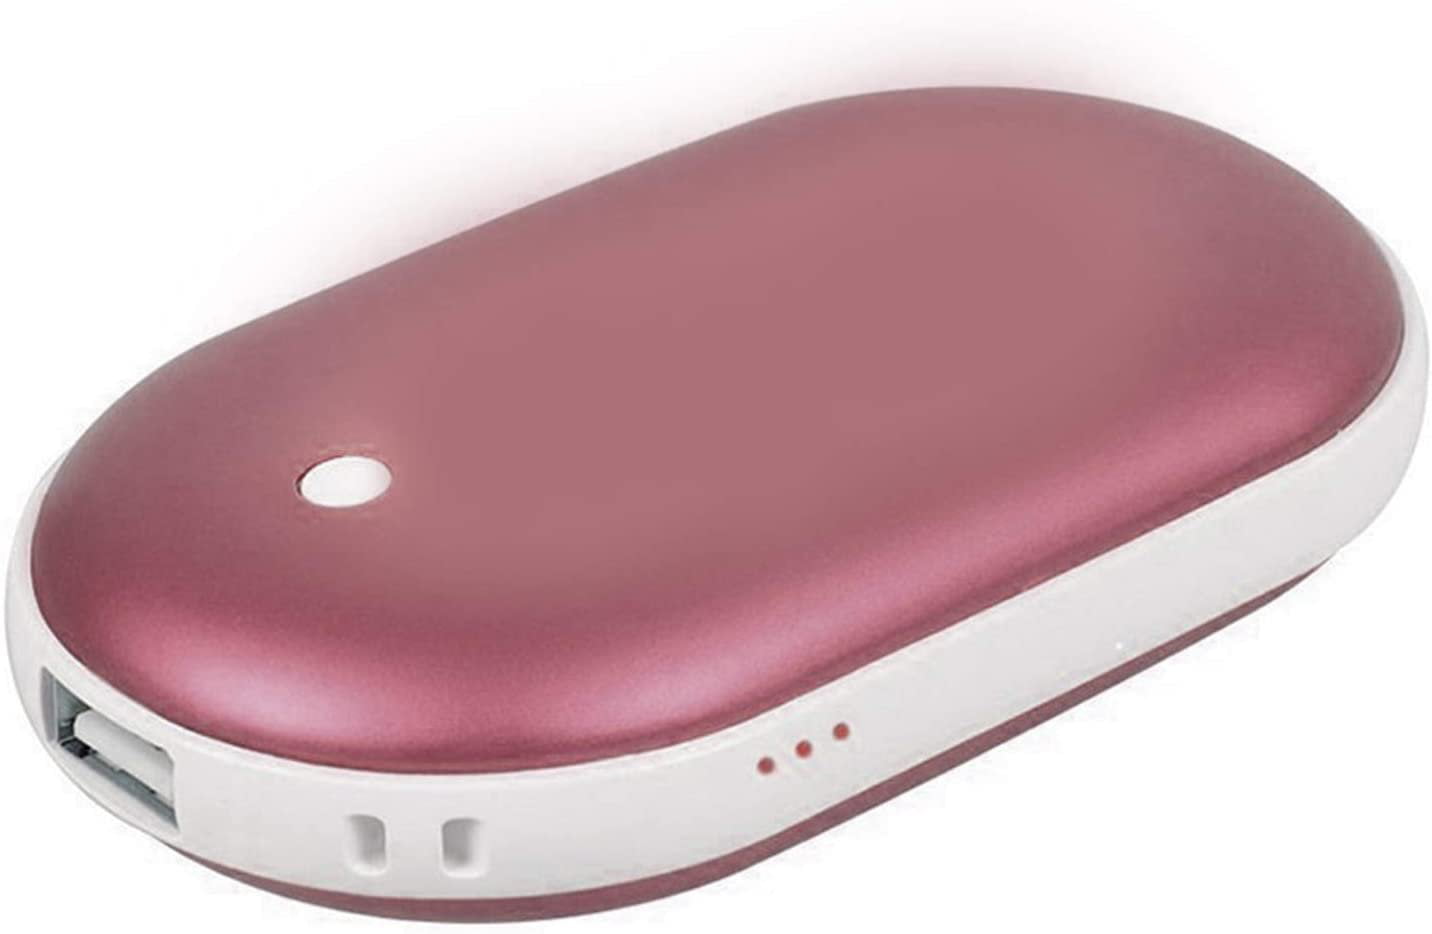 Anmas Box 5200Mah Portable USB Charger Pocket Electric Hand Warmer Rechargeable Heater